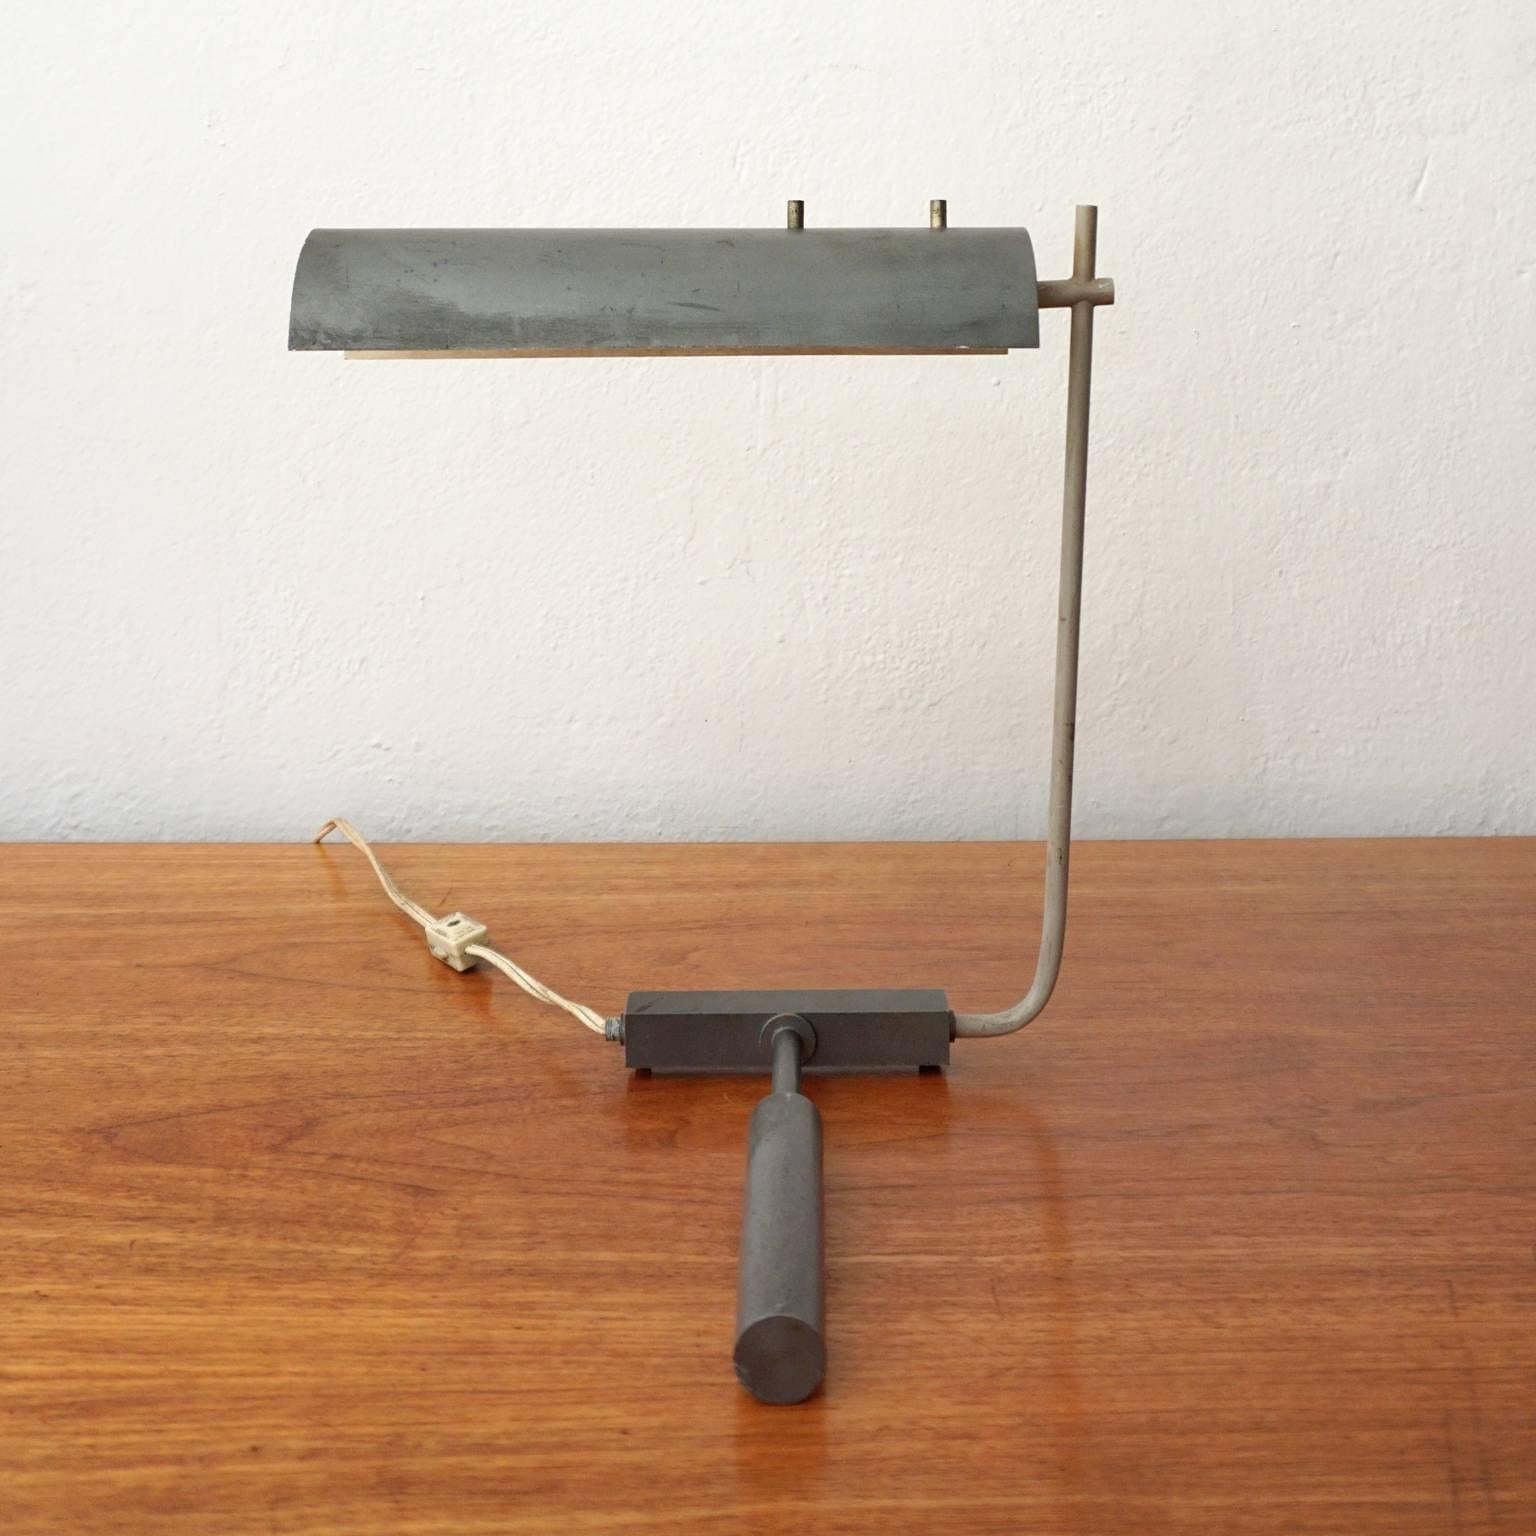 Minimalist desk lamp by J.J.M. Hoogervorst for Dutch company, Anvia. Hoogervorst's designs for Anvia were influenced by Arredoluce, Stilnovo, and Arteluce. However, this particular lamp, which is referred to as the piano lamp, evokes more of a De